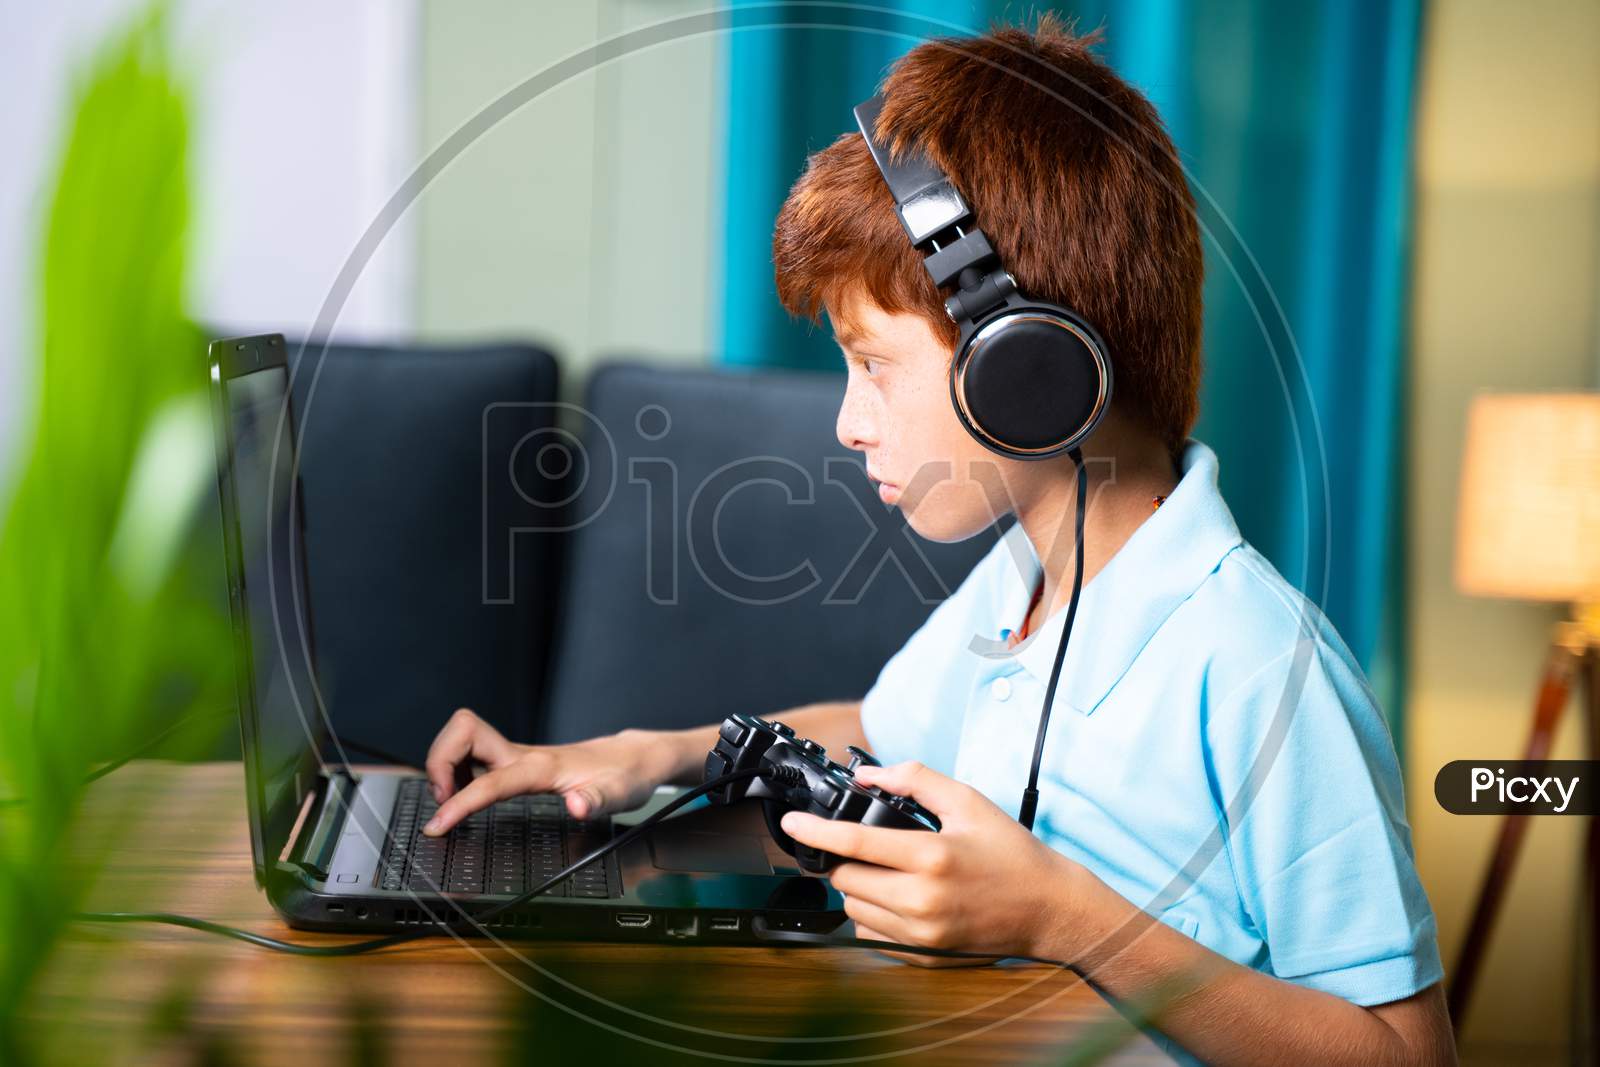 Kid Busy Searching And Playing Online Videogame On Laptop By Using Gamepad Or Joystick At Home By Wearing Headphone - Concept Of Kid Using Technology And Modern Lifestyle.